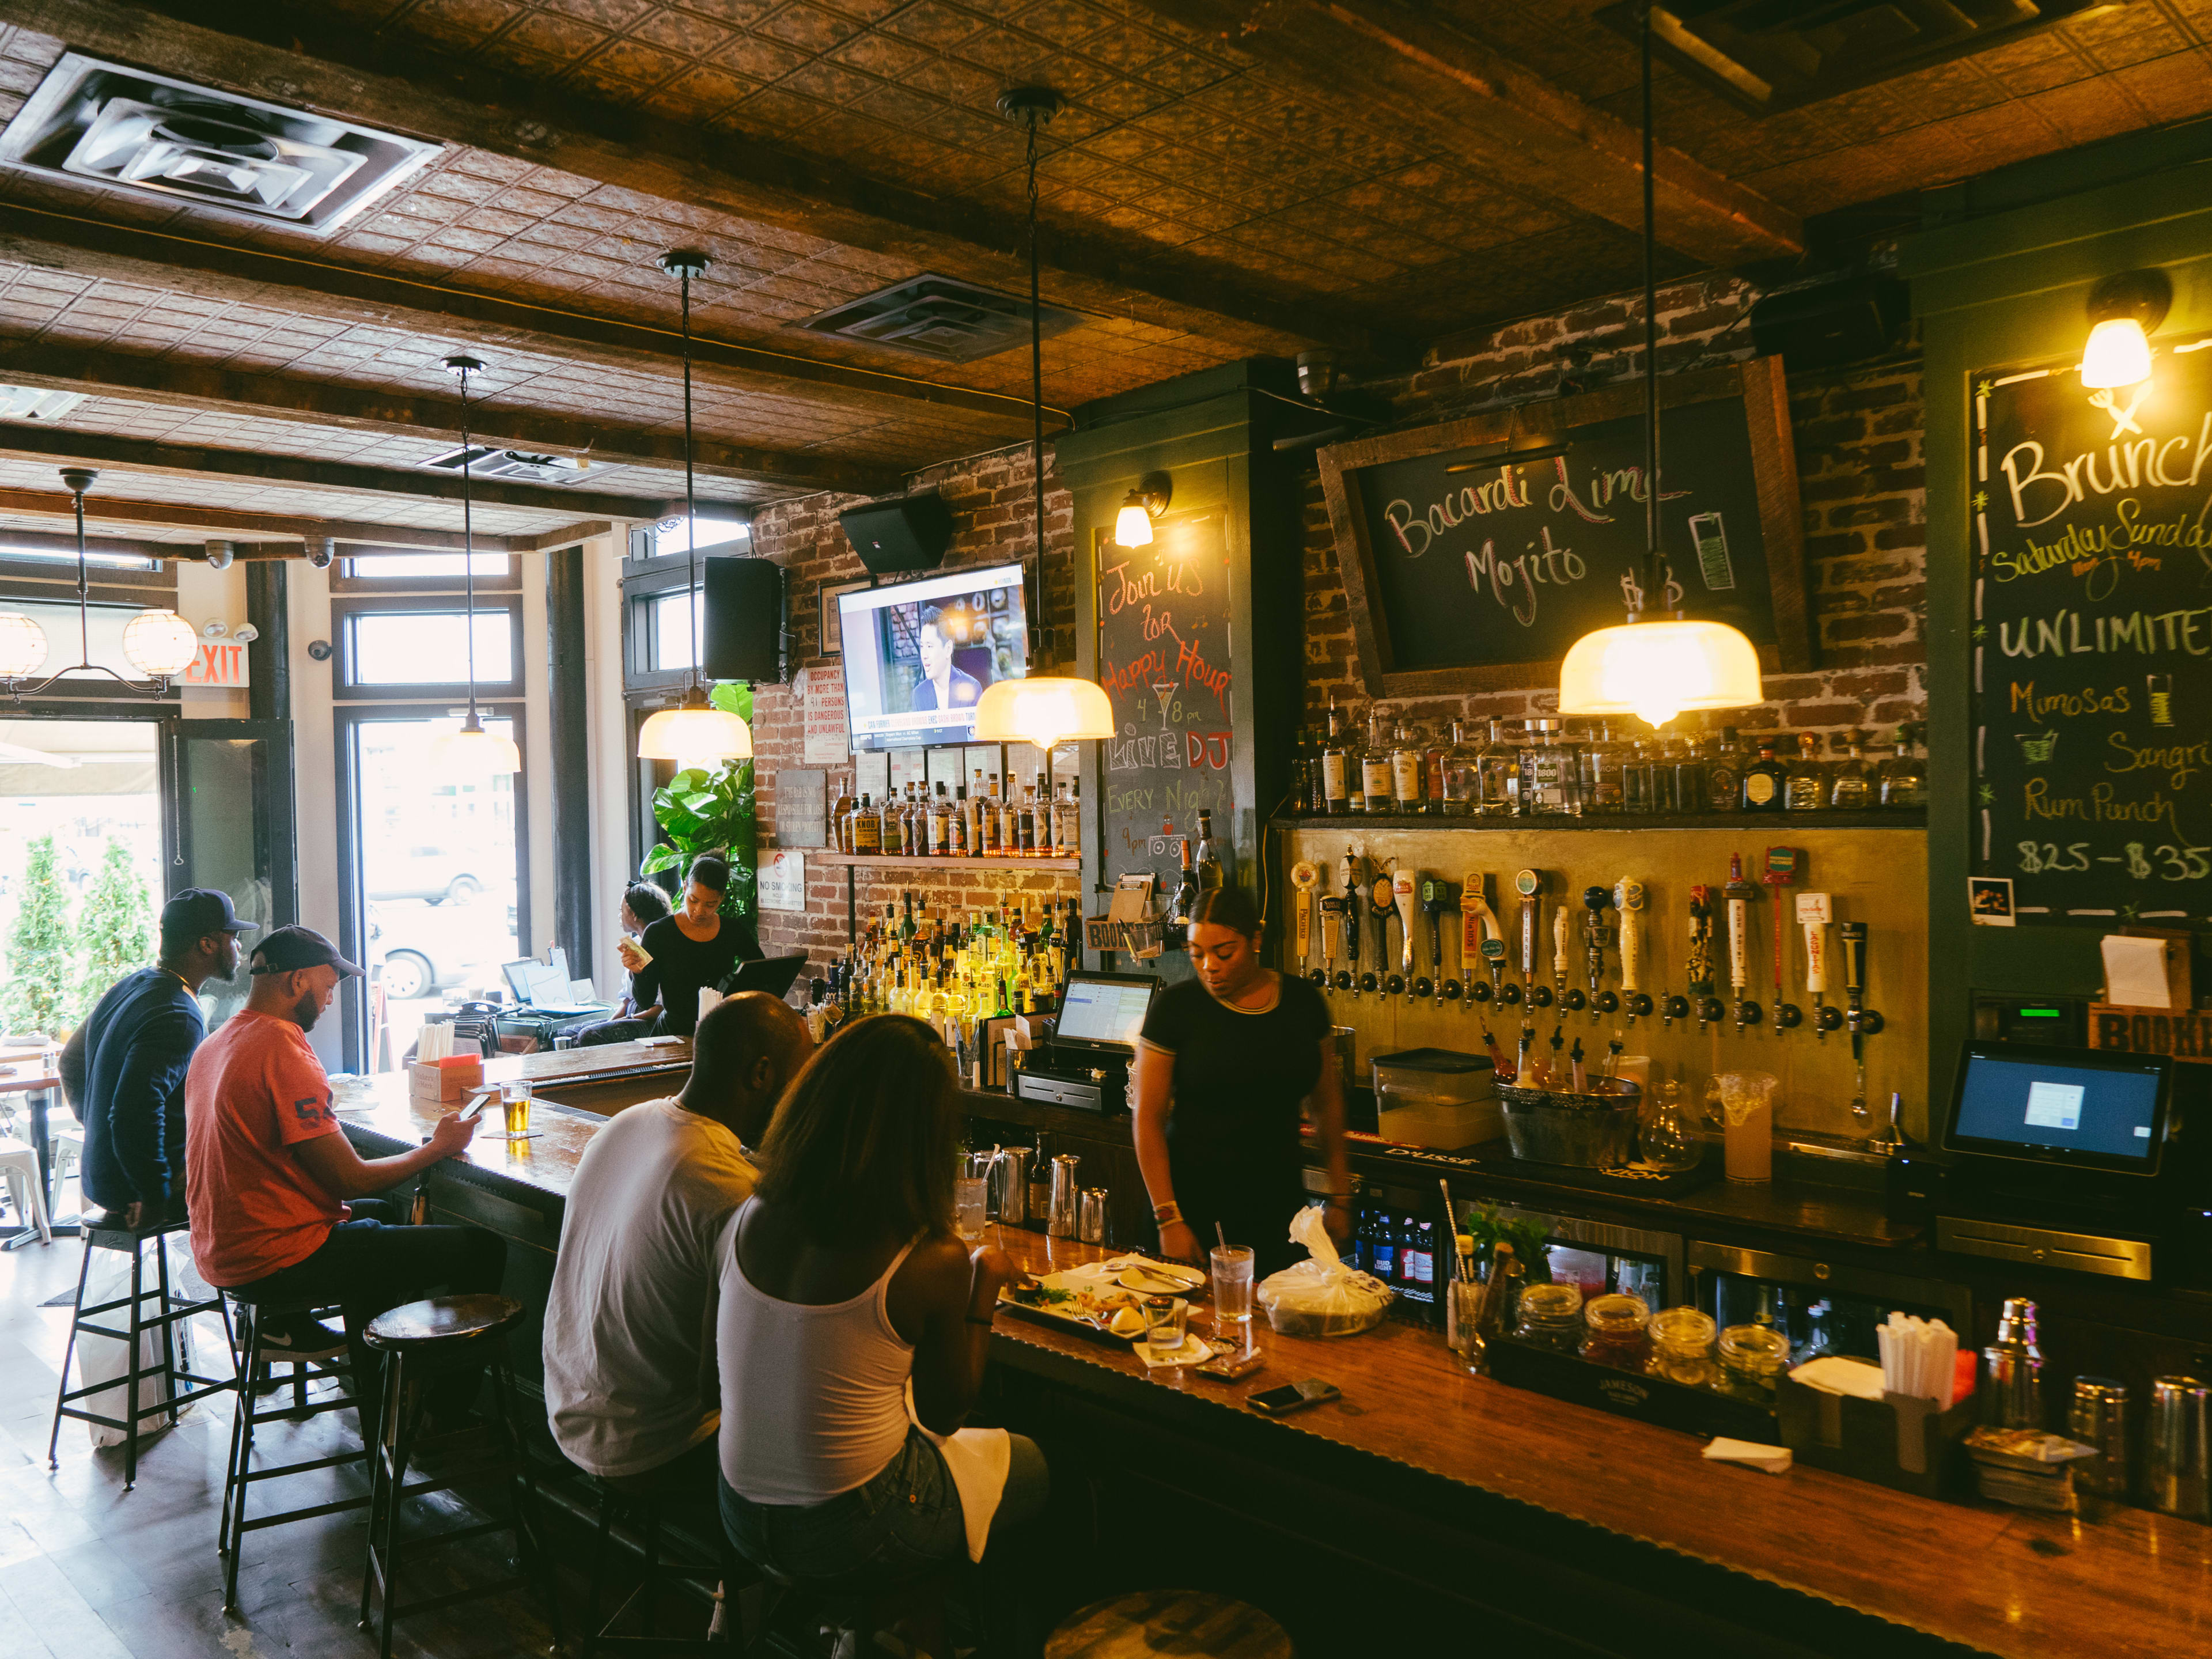 The open air interior of Corner Social. There are people sitting on stools at a wooden bar, a bartender behind the bar and one at the side.  The walls are brick and have liquor on shelves and menu items on chalkboards.